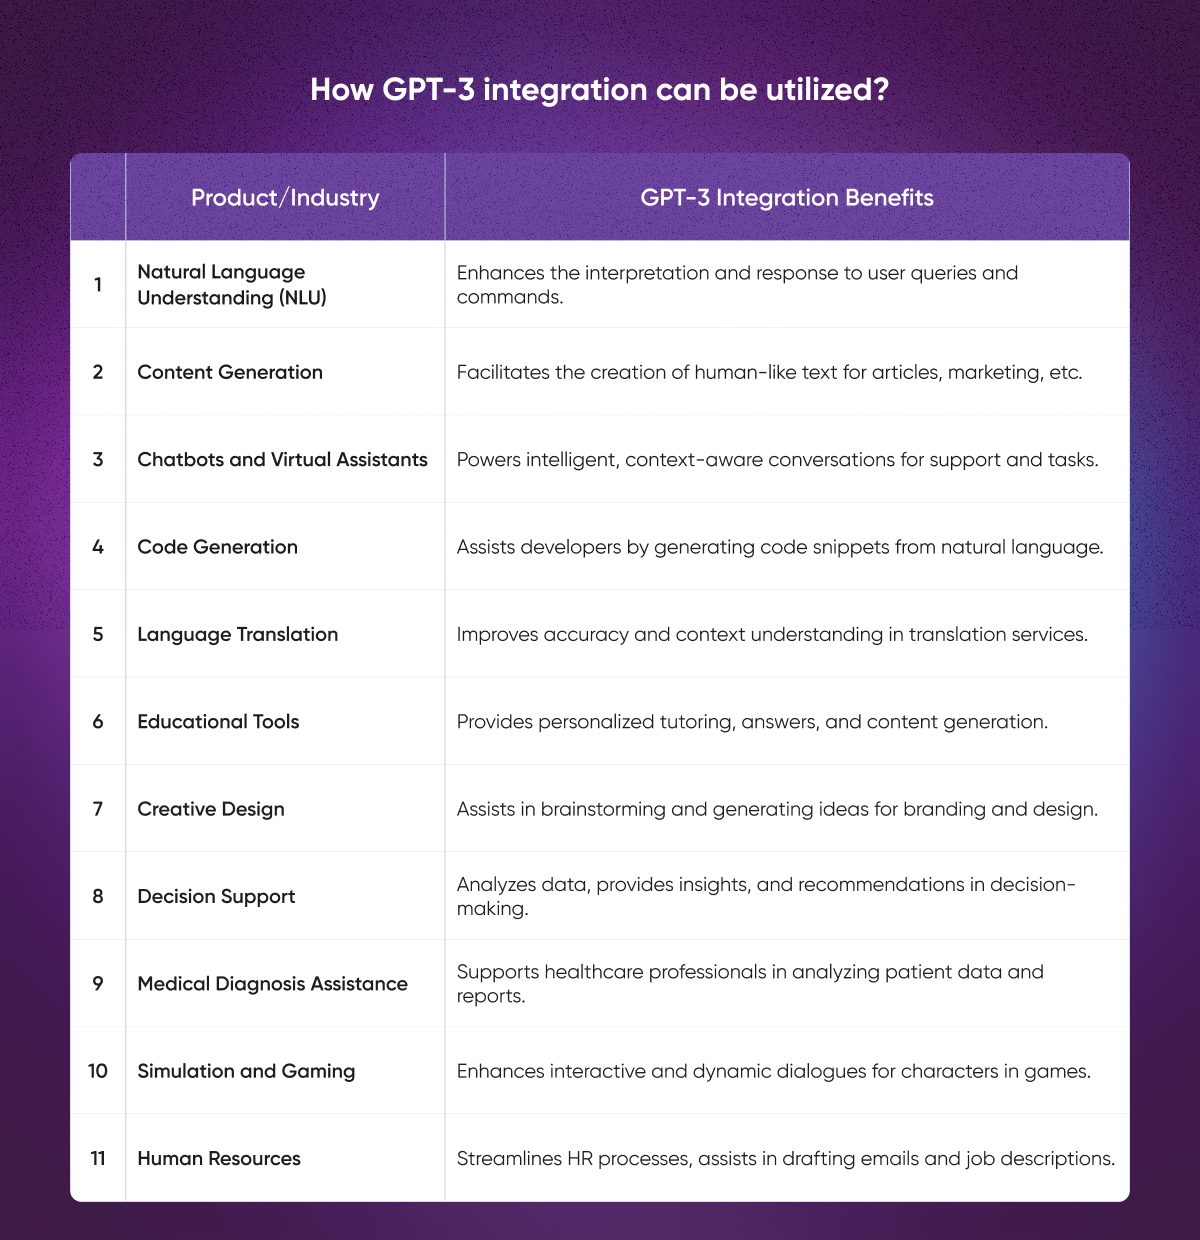 How GPT-3 integration can be utilized?